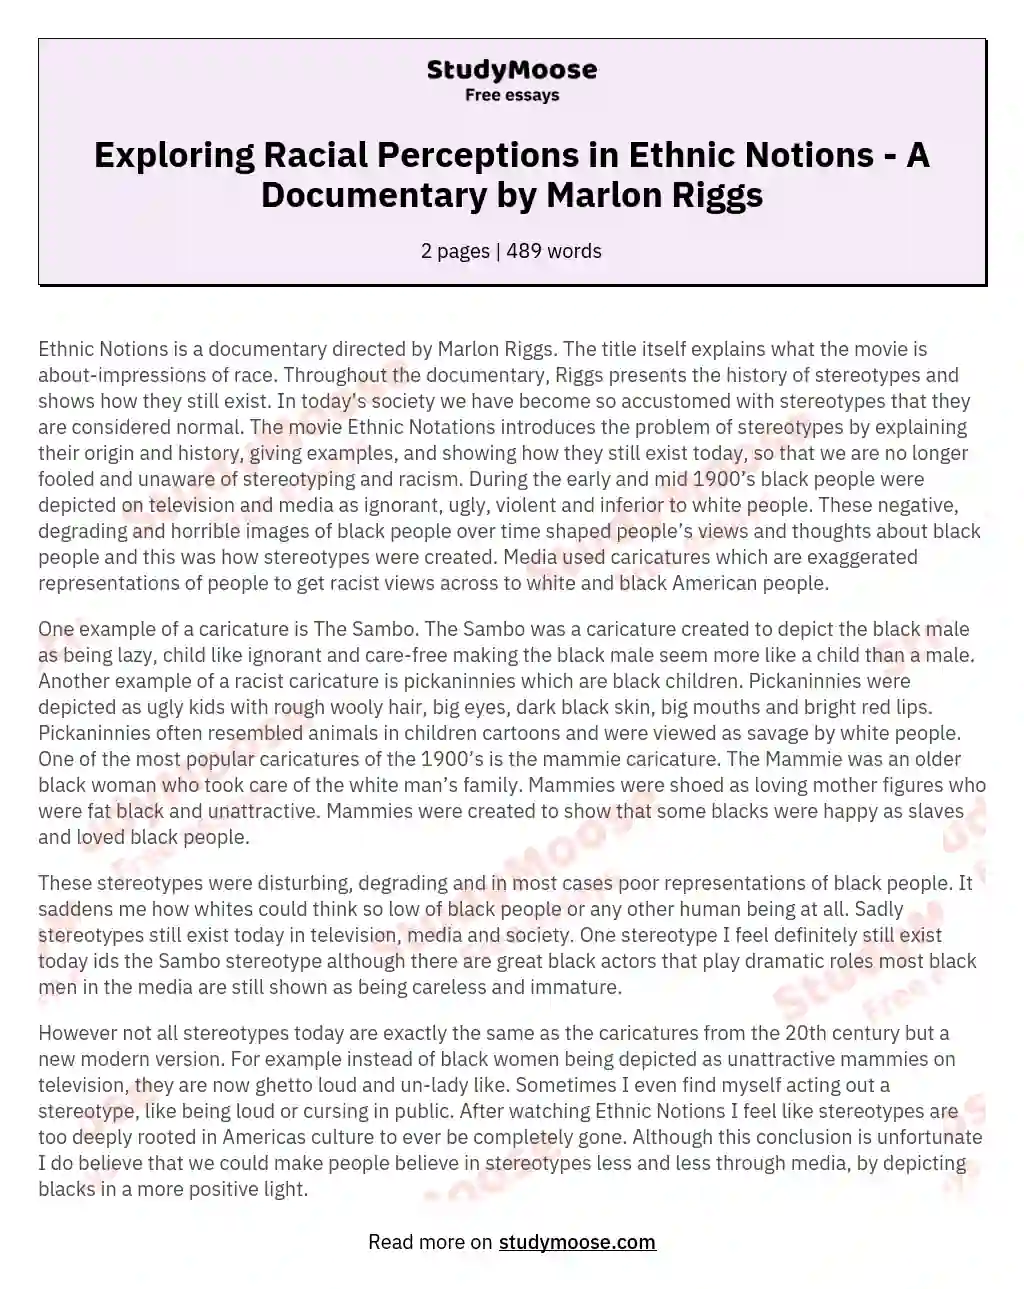 Exploring Racial Perceptions in Ethnic Notions - A Documentary by Marlon Riggs essay